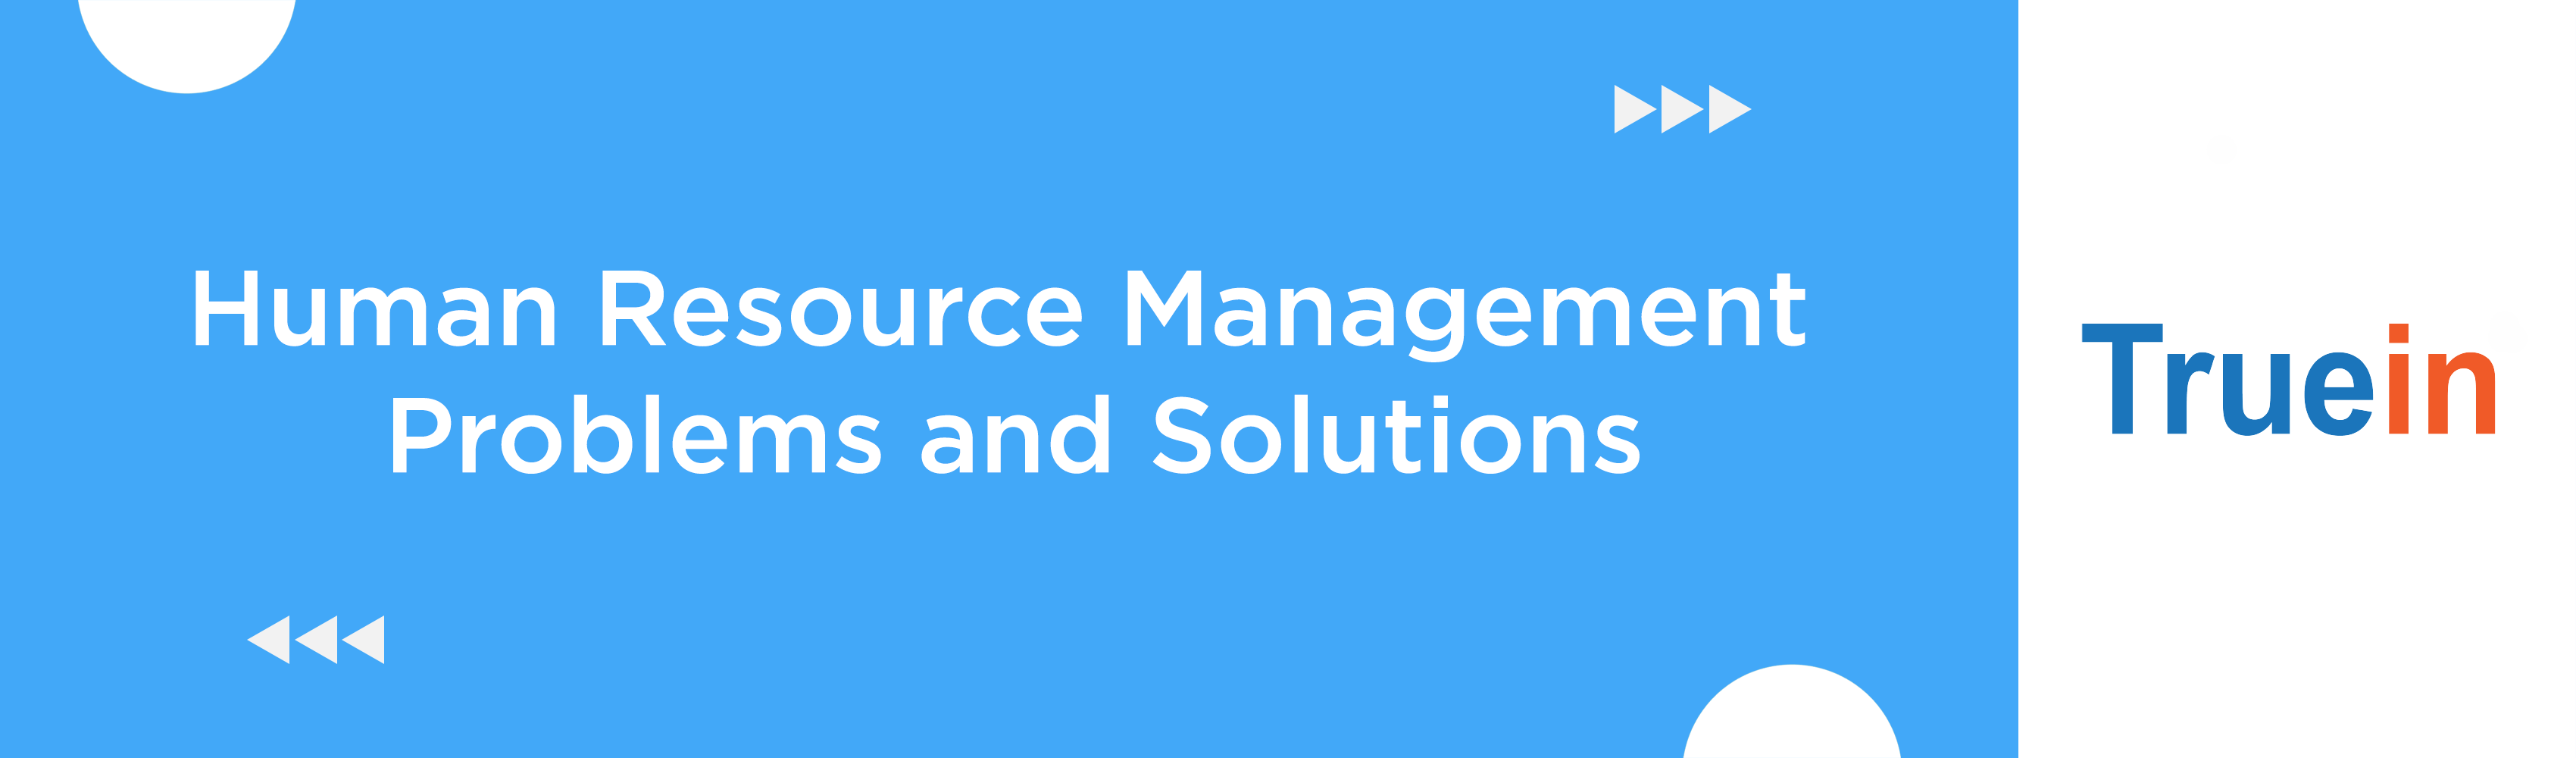 Human Resource Management Problems and Solutions